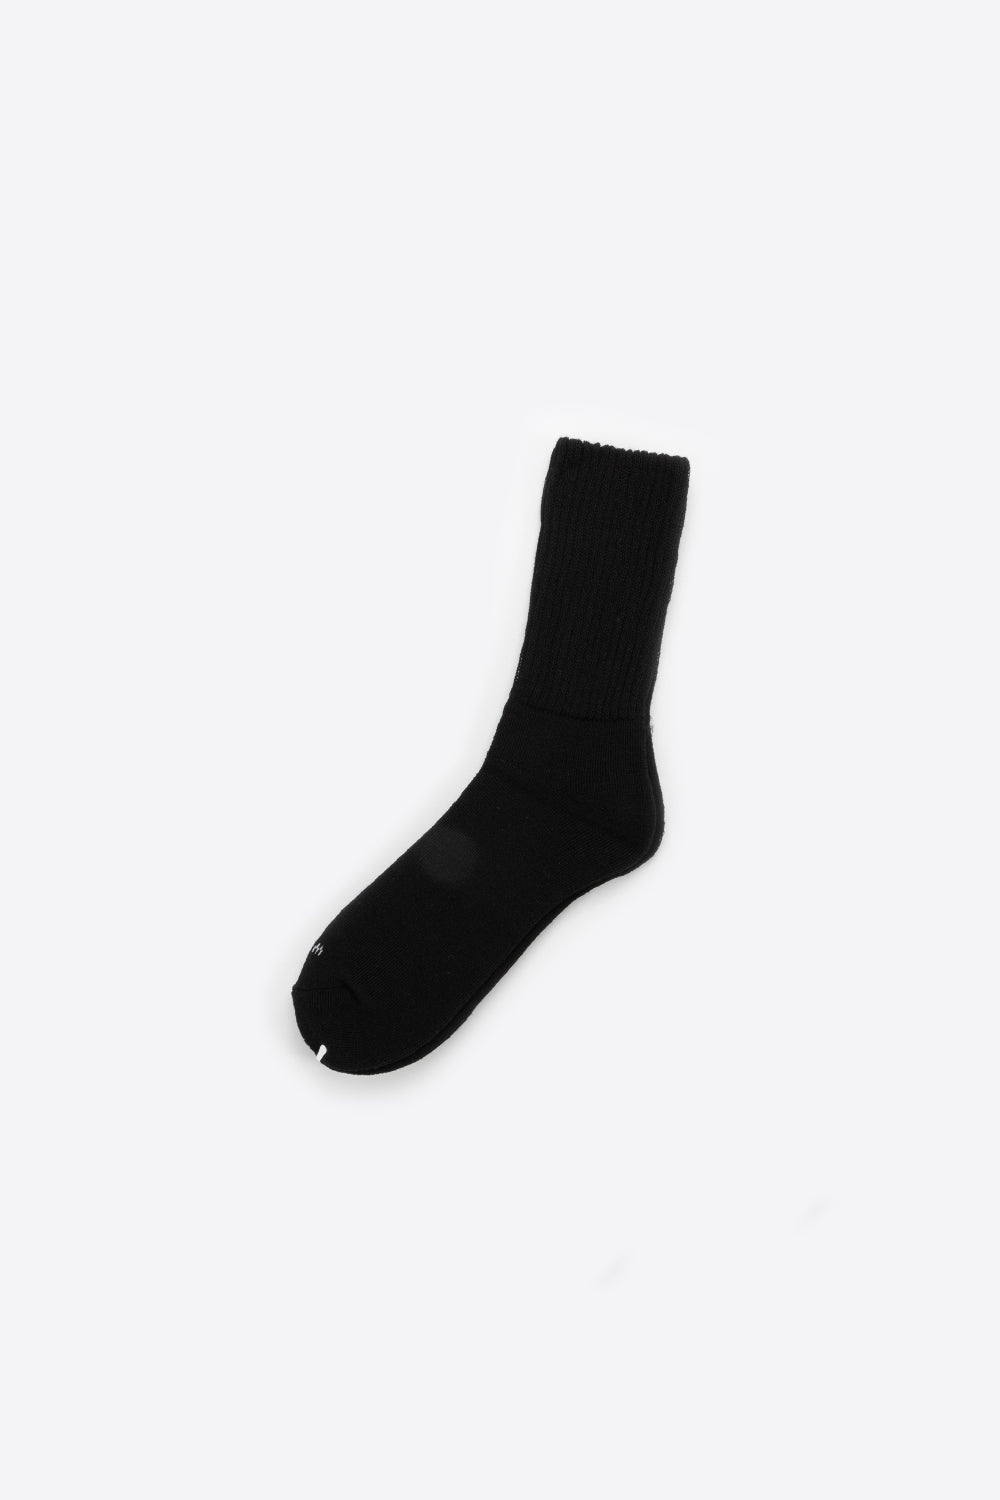 rostersox merino wool pile black front